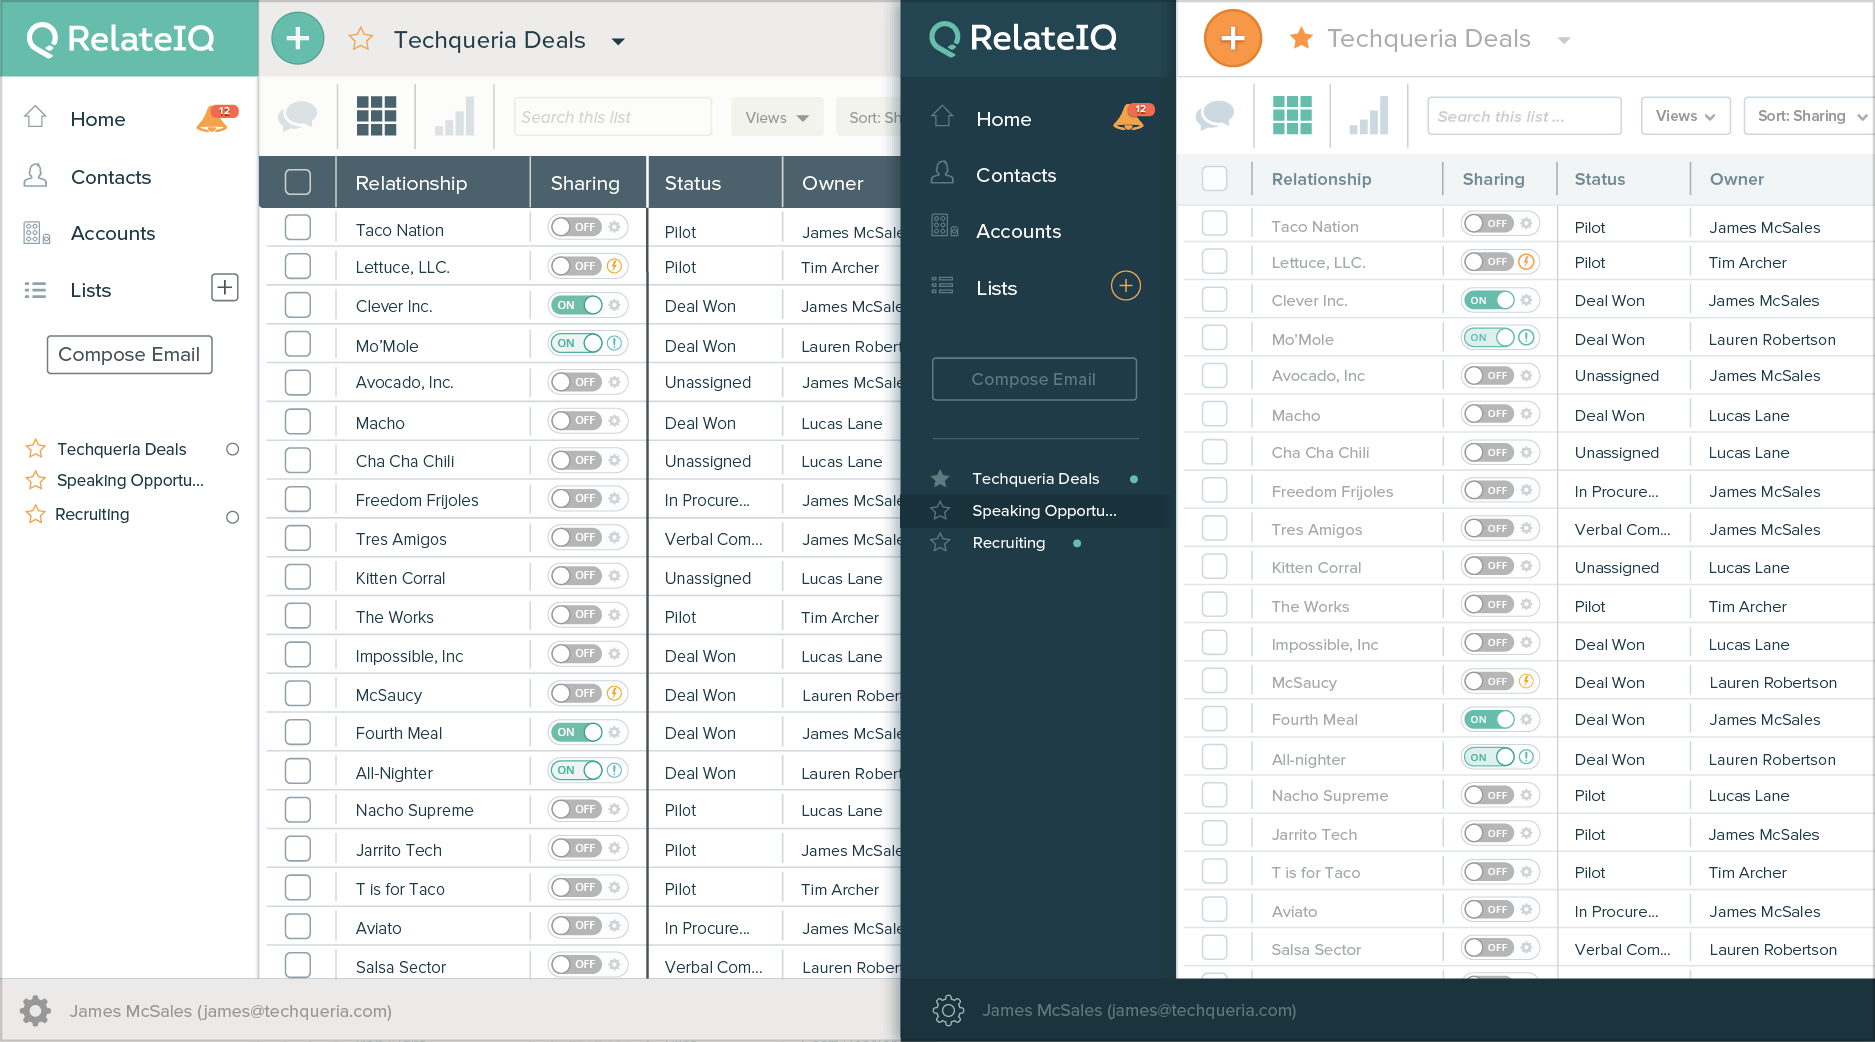 RelateIQ - RelateIQ: Contact Management, Reports, Opportunity Management